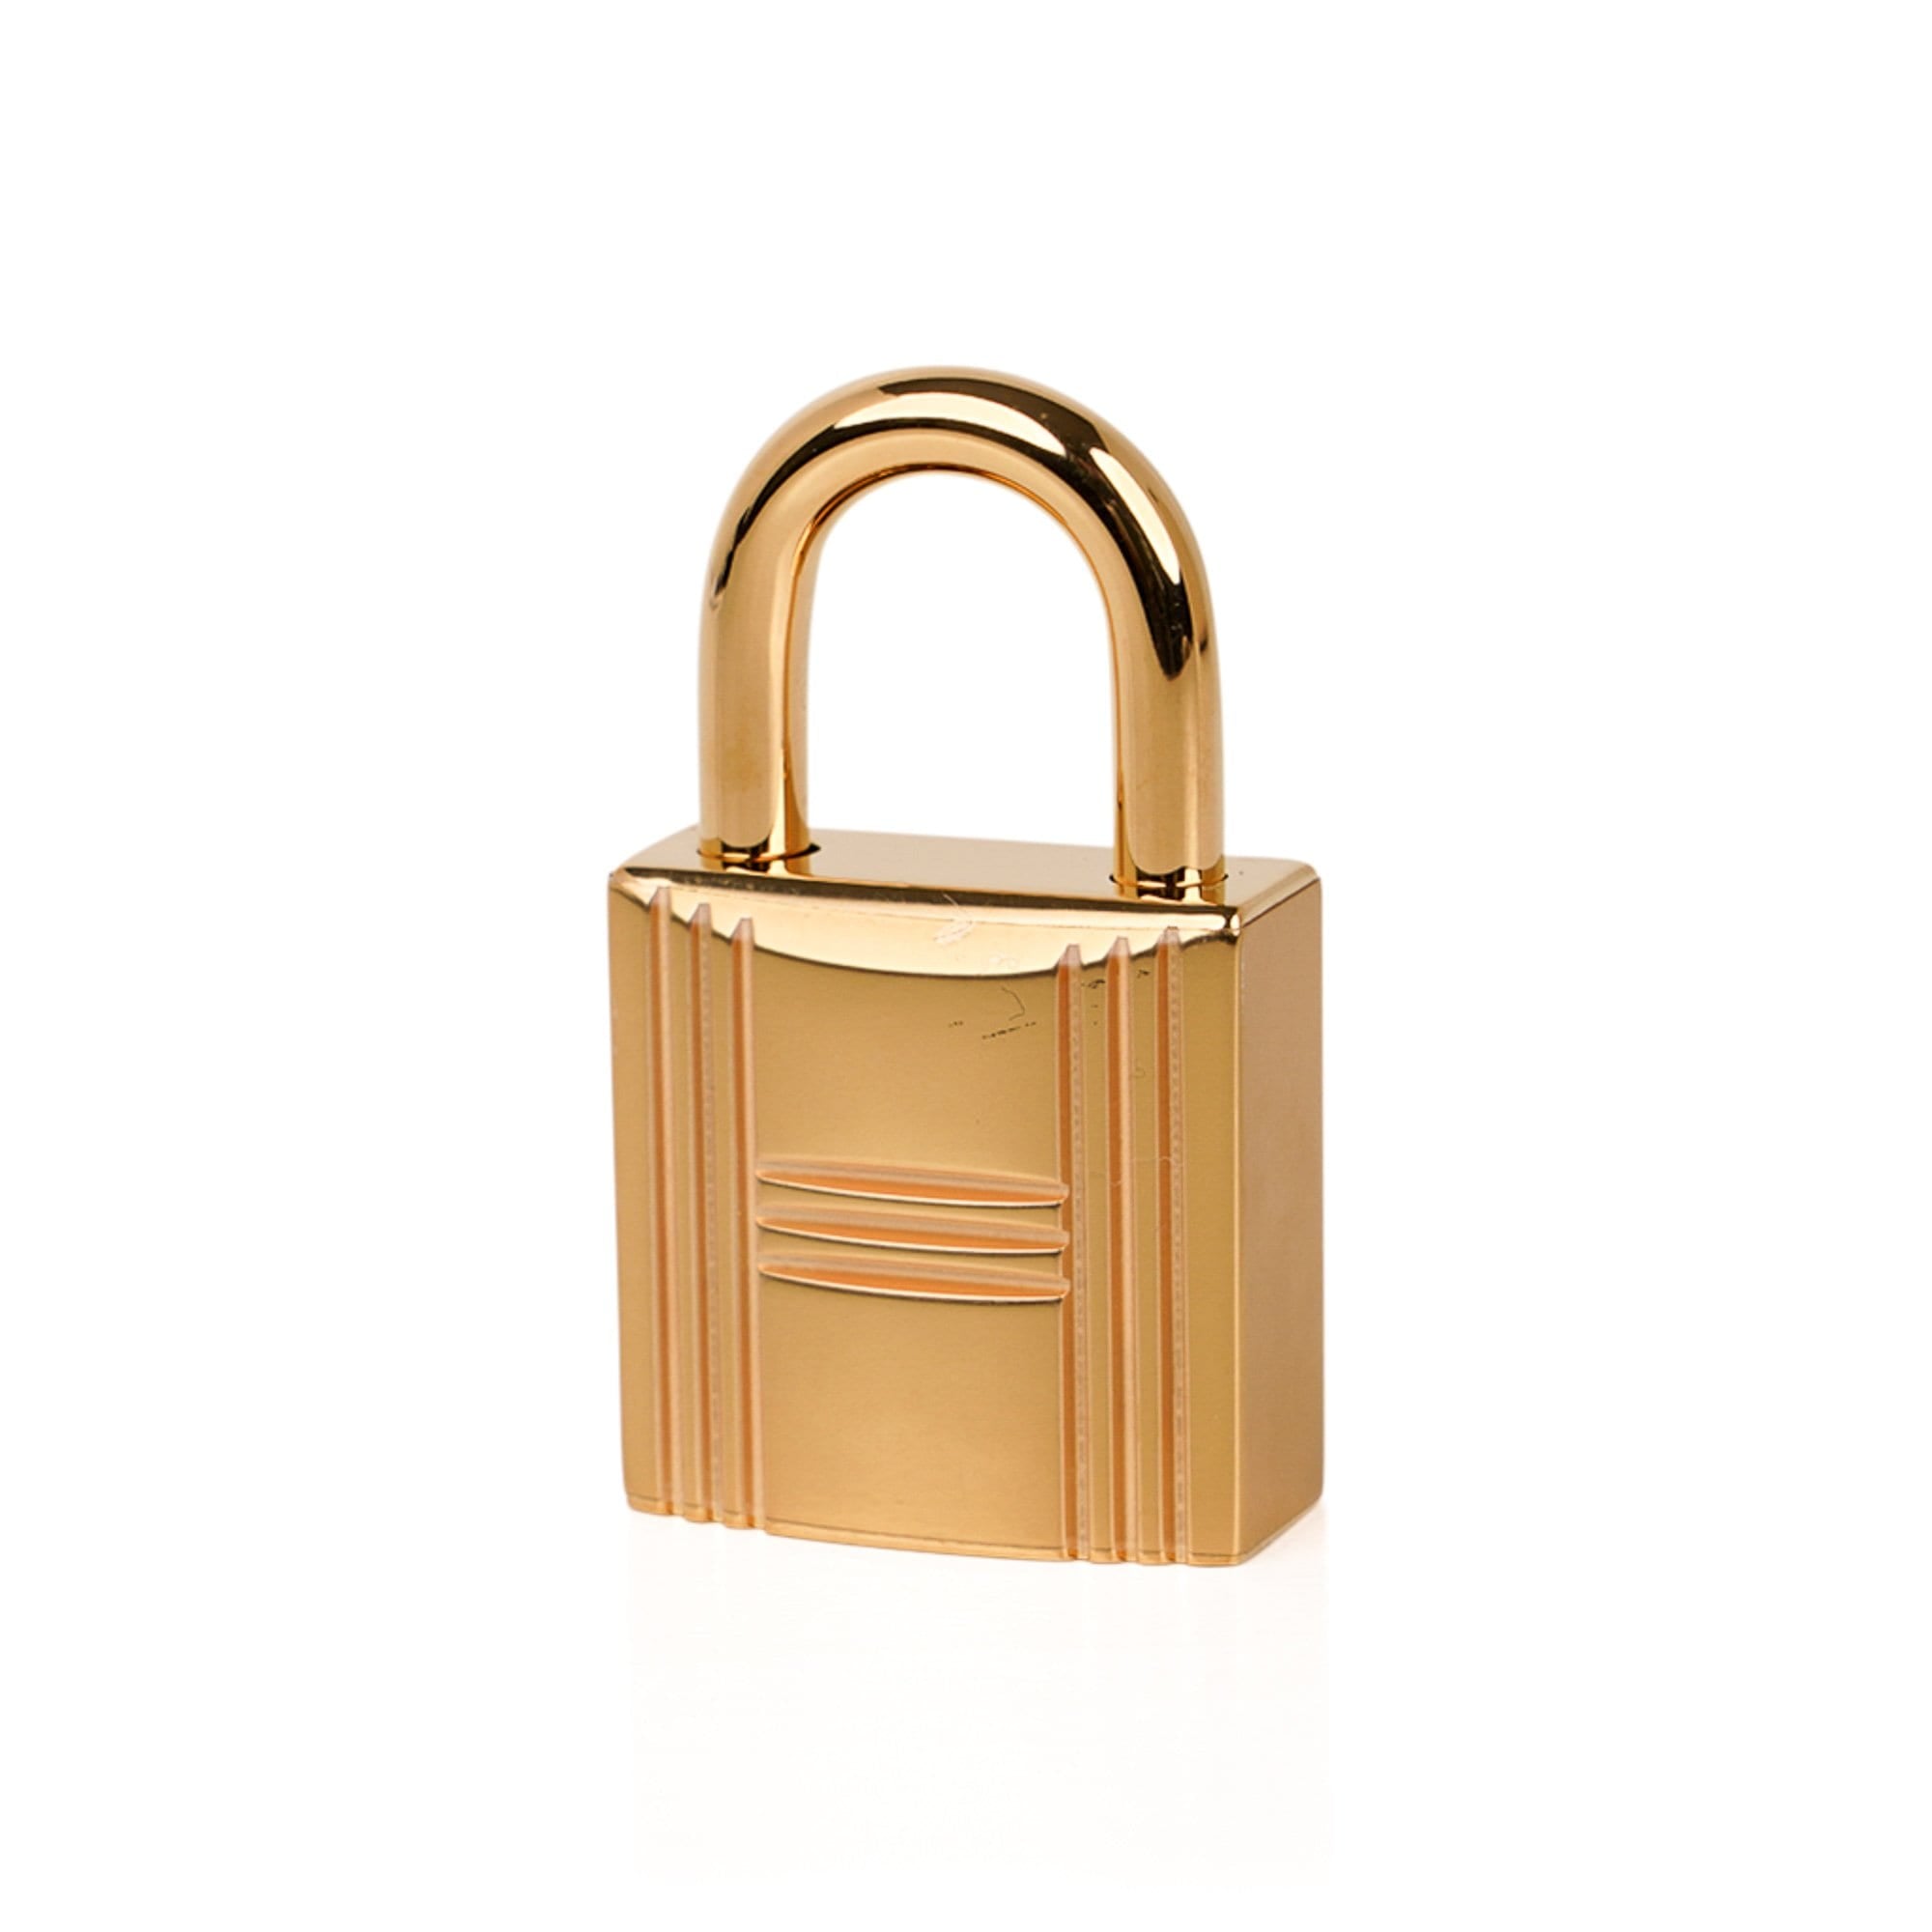 Hermes Lock 18 Bag Trench Gold Hardware Clemence Leather – Mightychic